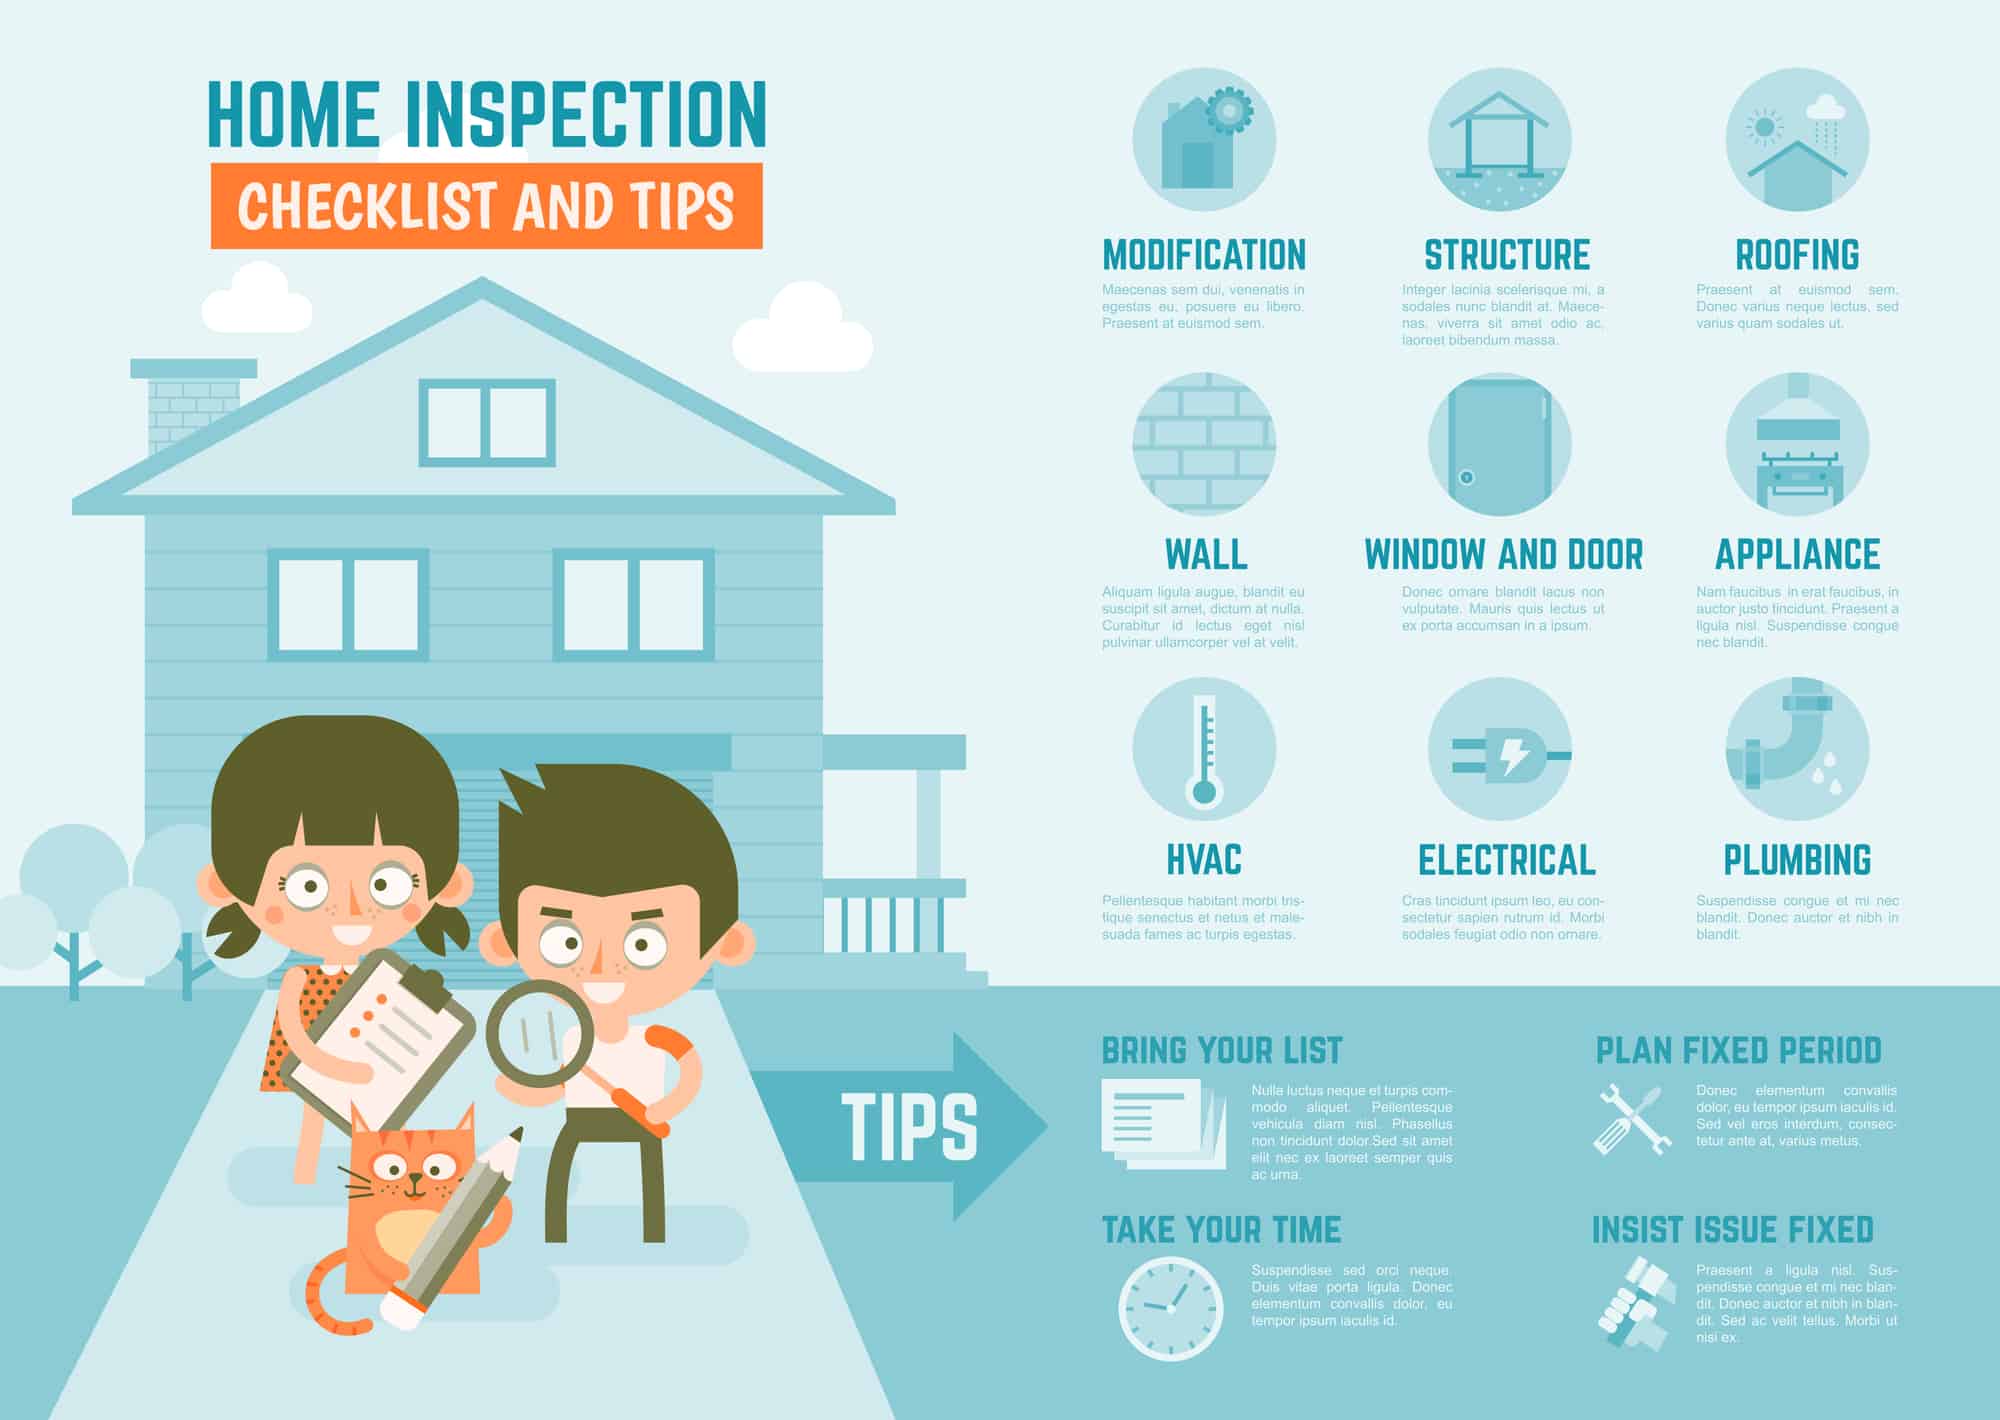 what is the best way to prepare for an inspection